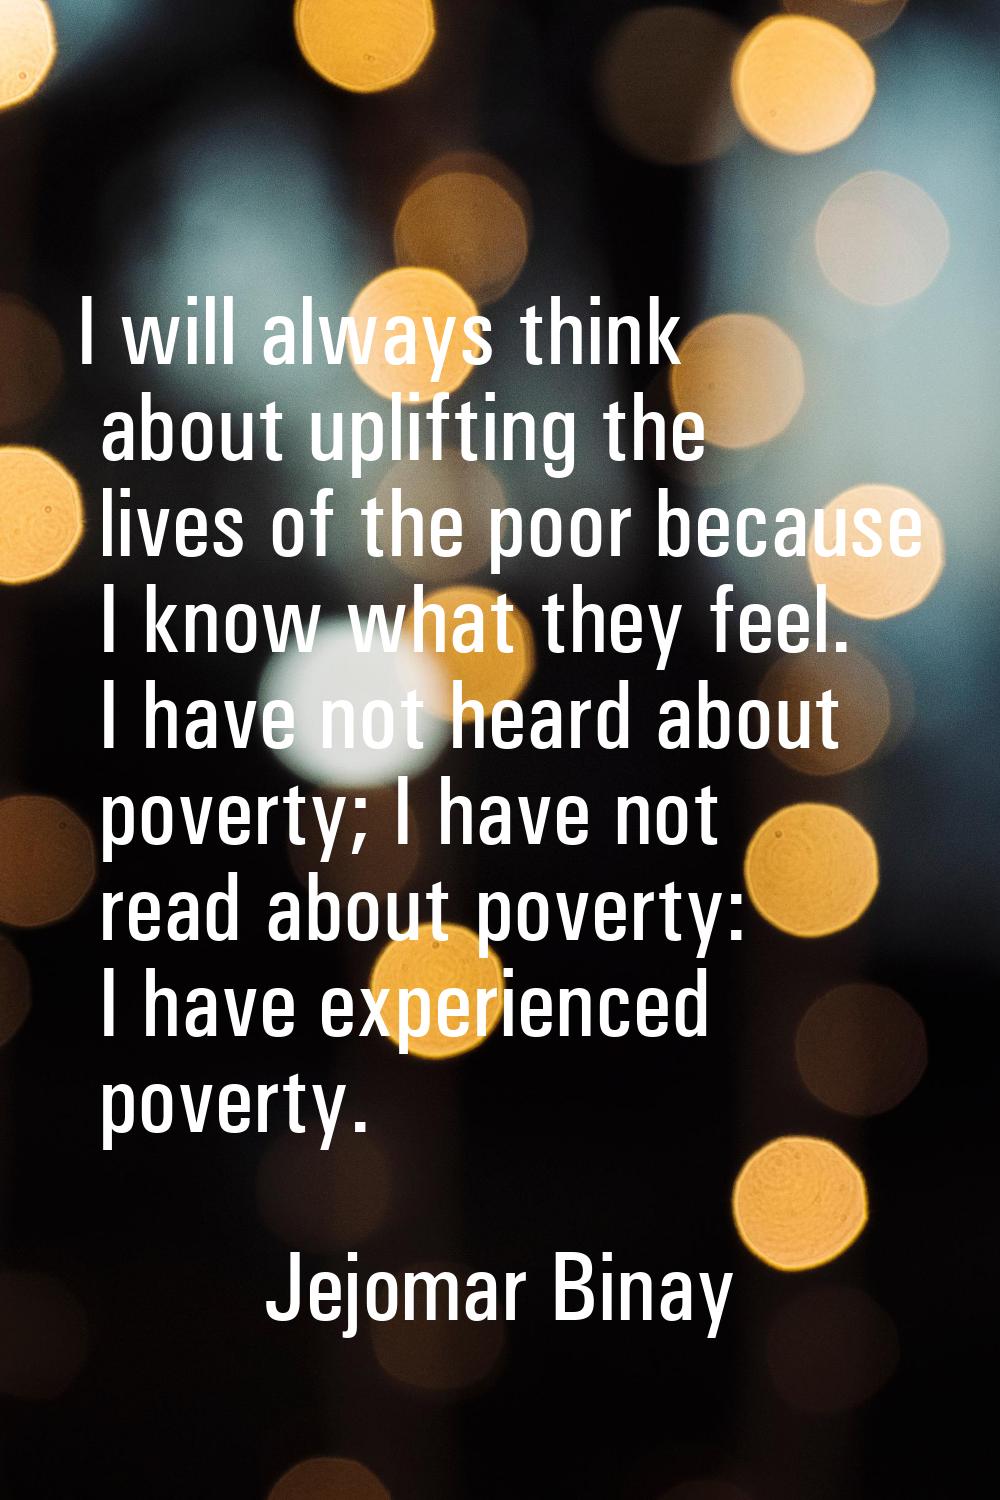 I will always think about uplifting the lives of the poor because I know what they feel. I have not